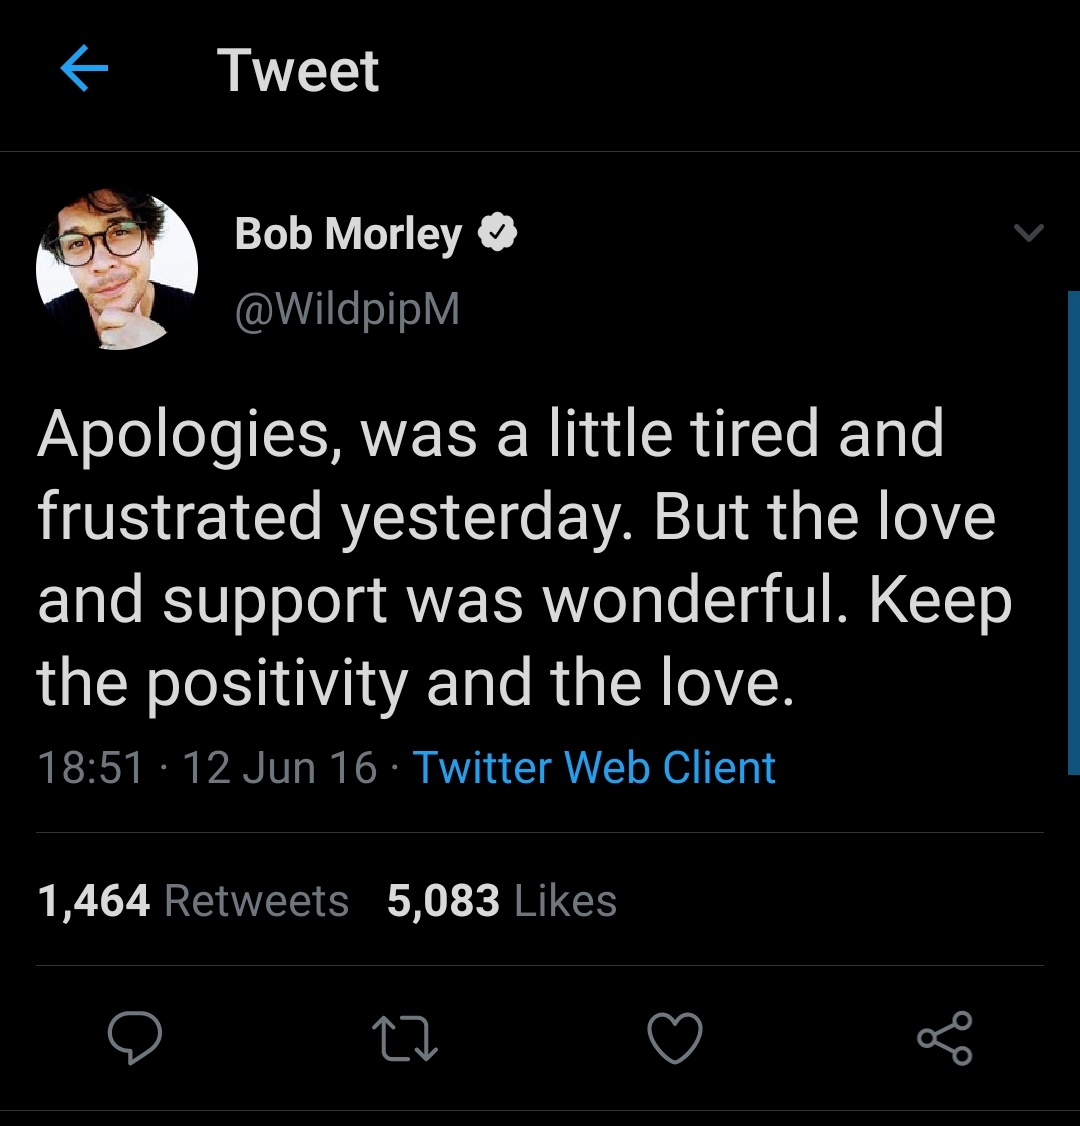 receipts of bob making fun of people with speaking difficulties (tweet is still up. comments filled with ppl calling him ableist) he came back a day later and excused his own ableism by saying he was as a little tired instead of apologizing for real and deleting his tweet.